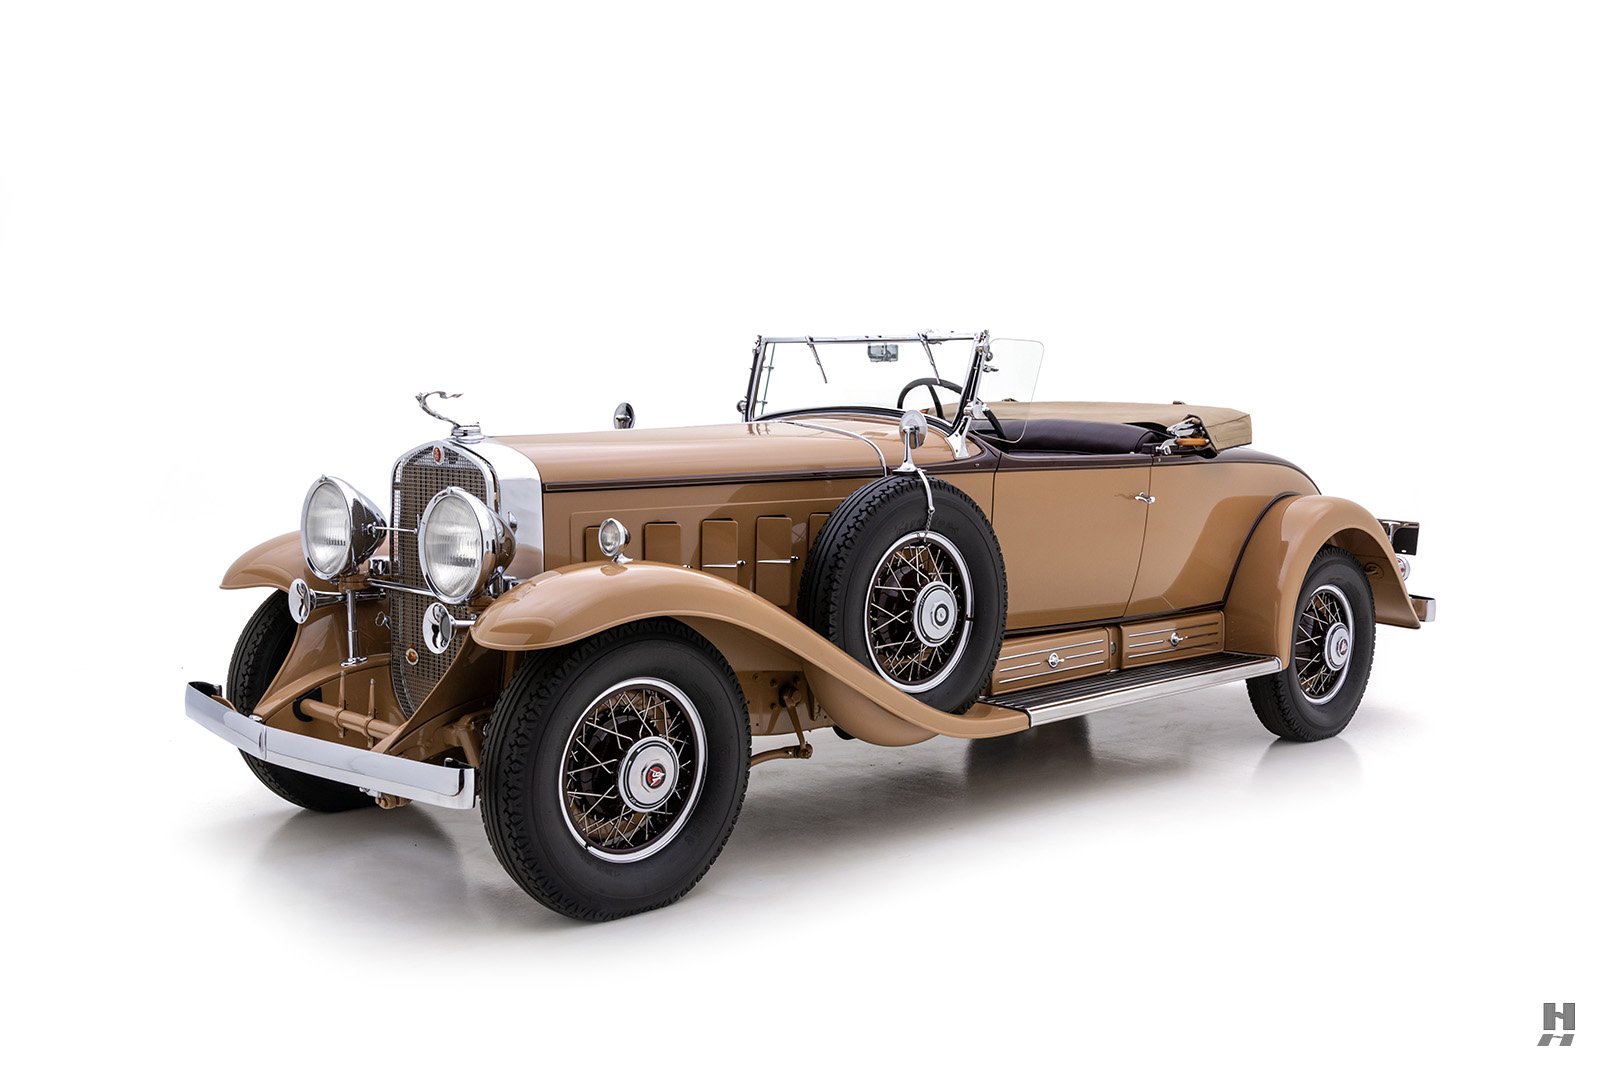 1930 Cadillac V16 For Sale | Vintage Driving Machines